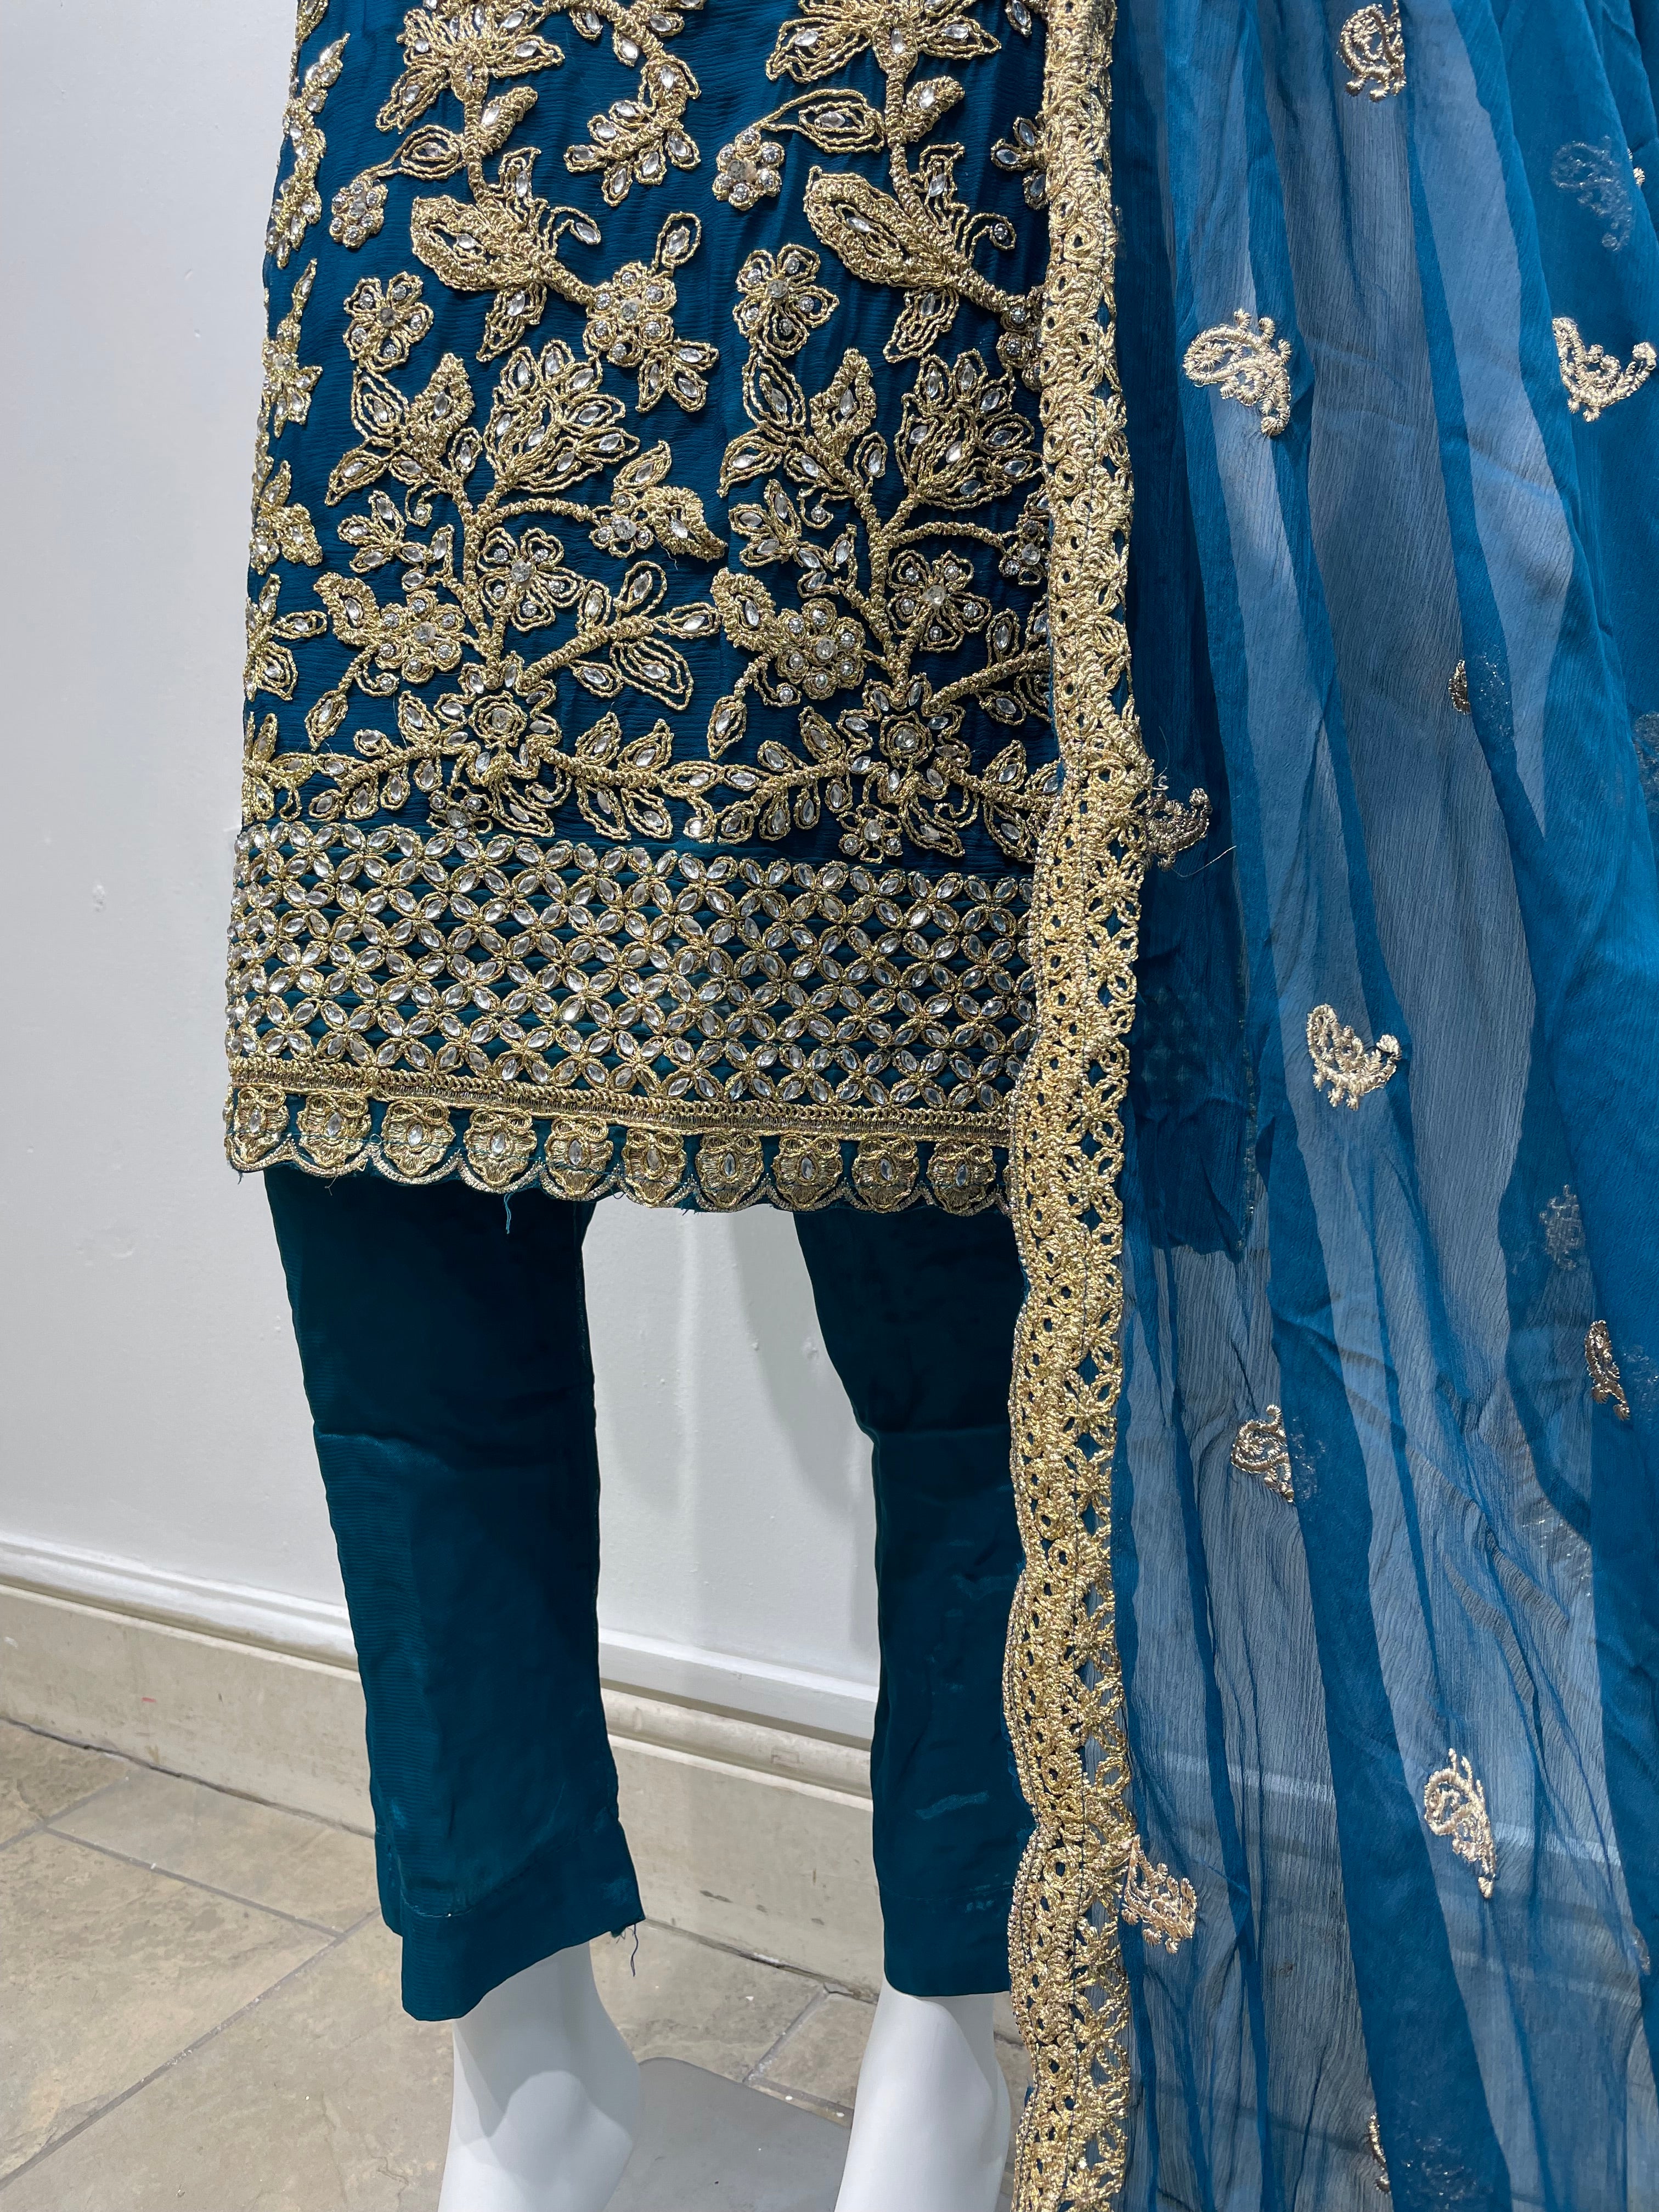 Teal Chiffon Shalwar Kameez with Gold Embroidery